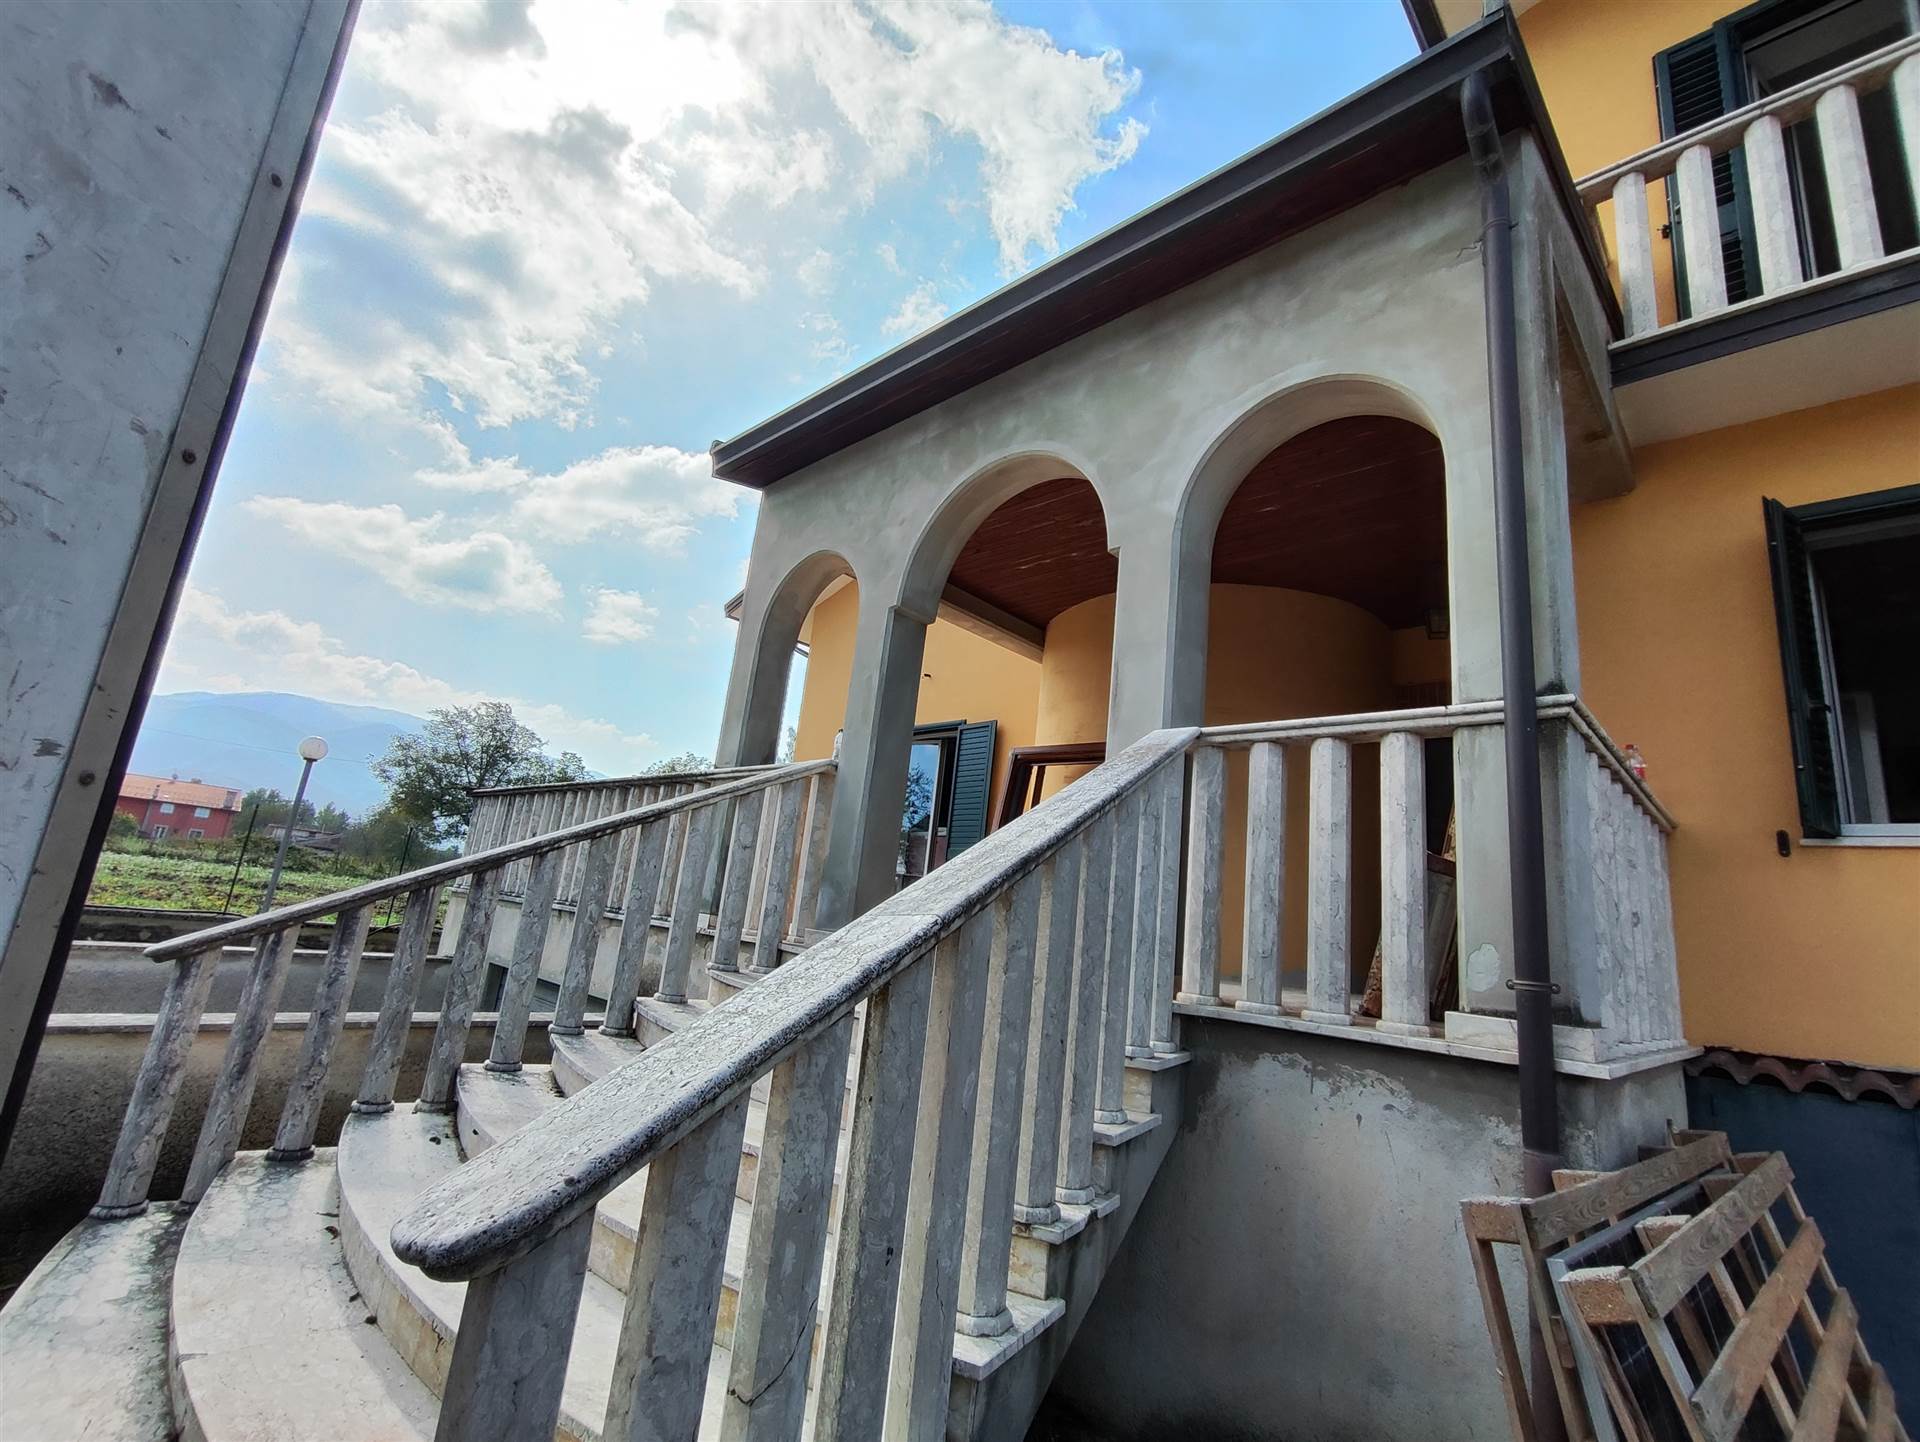 MONTELLA, Villa for sale of 560 Sq. mt., Excellent Condition, Heating Individual heating system, Energetic class: A1, placed at 2° on 2, composed by: 